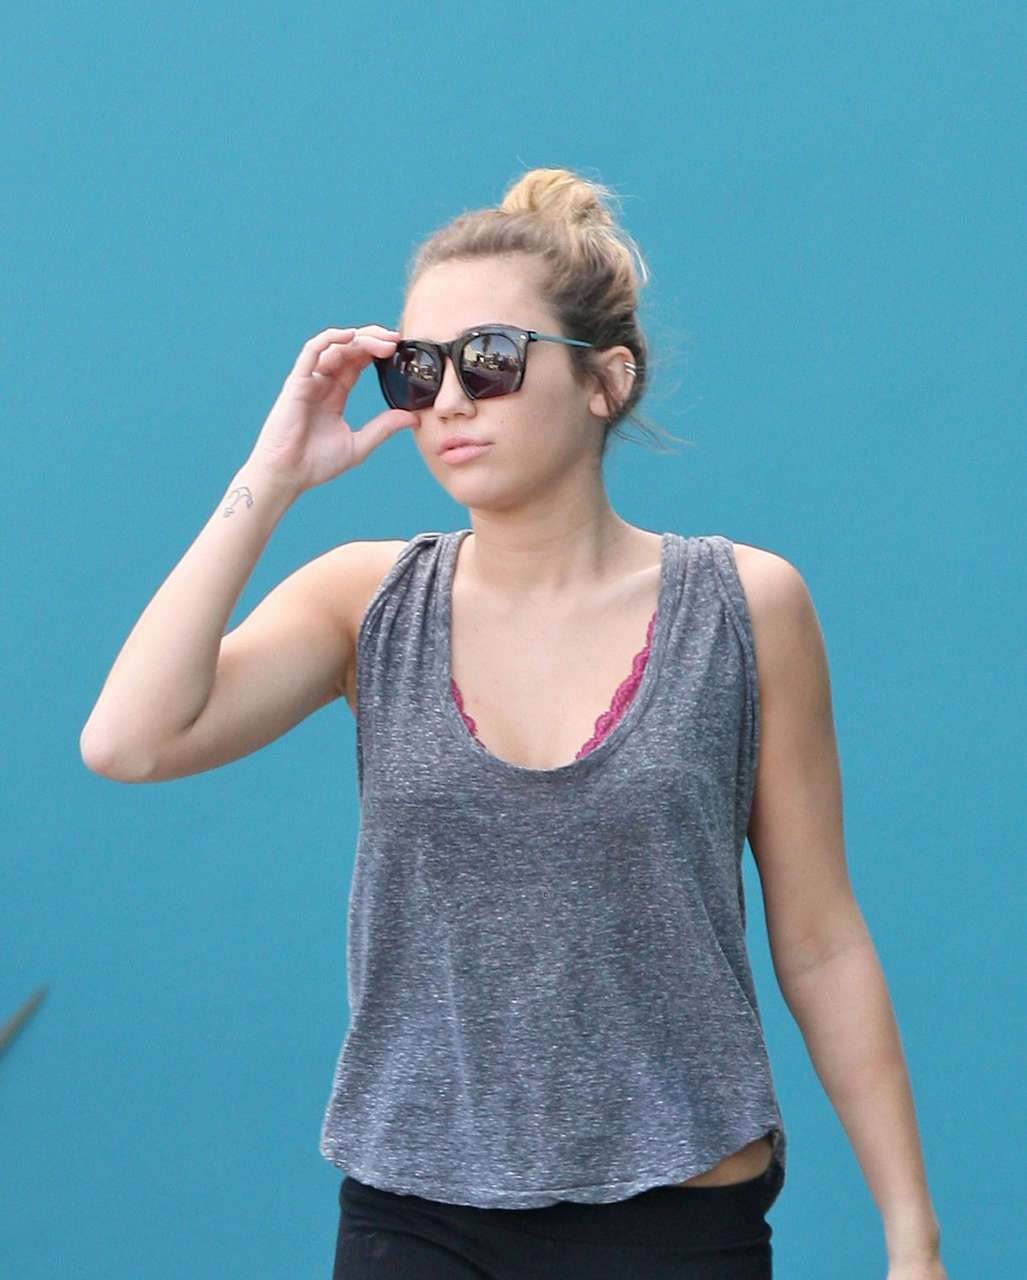 Miley Cyrus Leaves Pilates Class West Hollywood